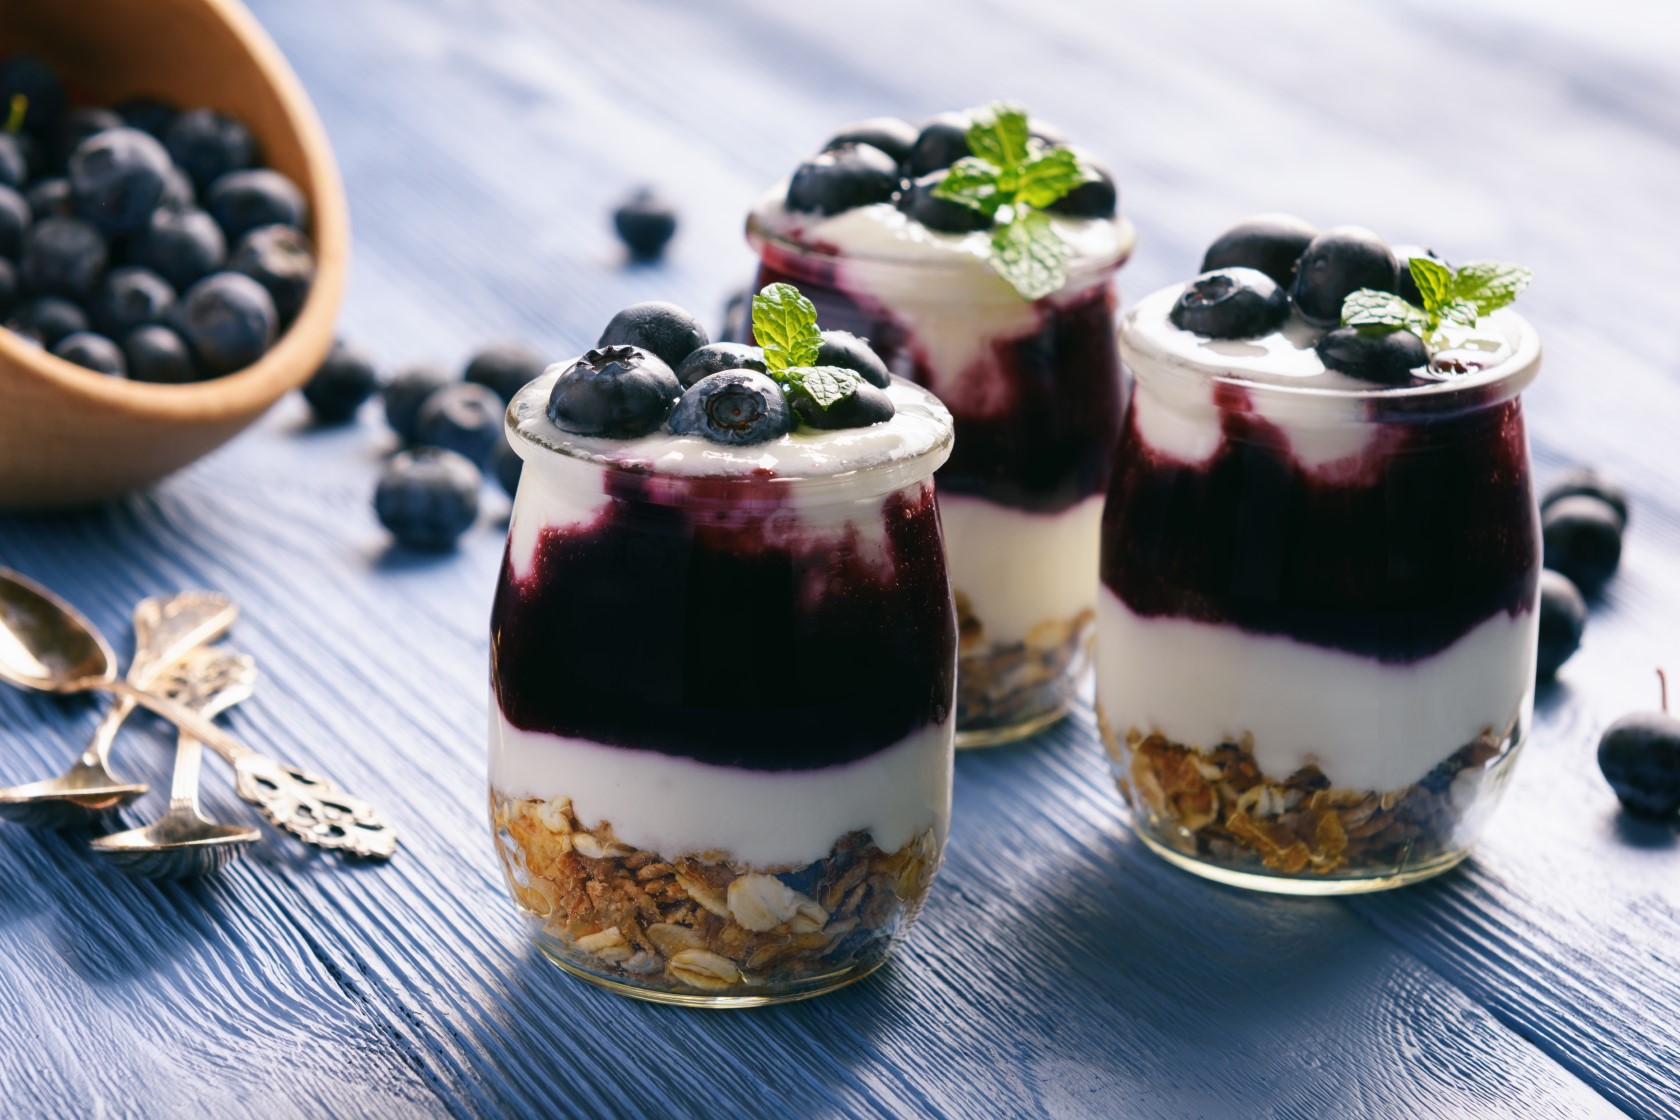 16 tips for weight loss: make healthy desserts